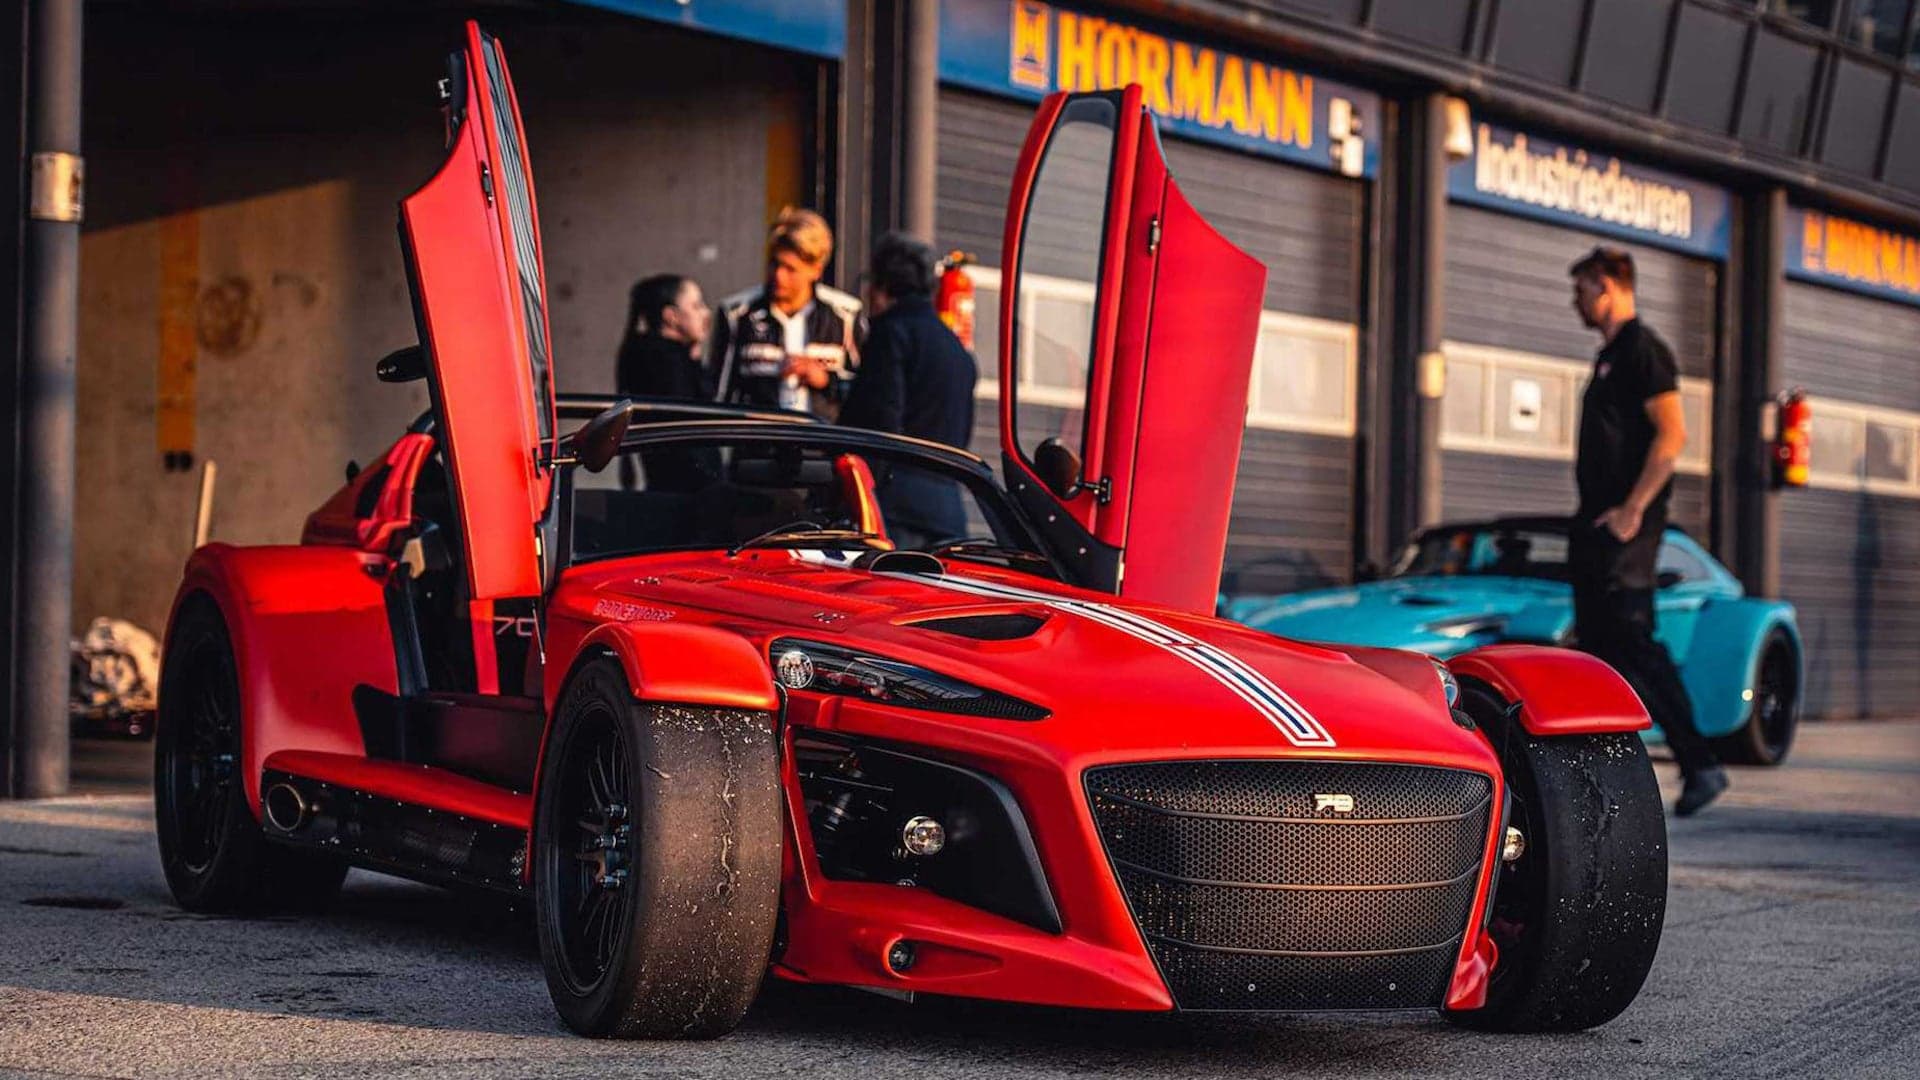 Donkervoort D8 GTO-JD70 R: The Fastest Wrapper (and Strangest Name) for Audi’s Five-Cylinder Turbo